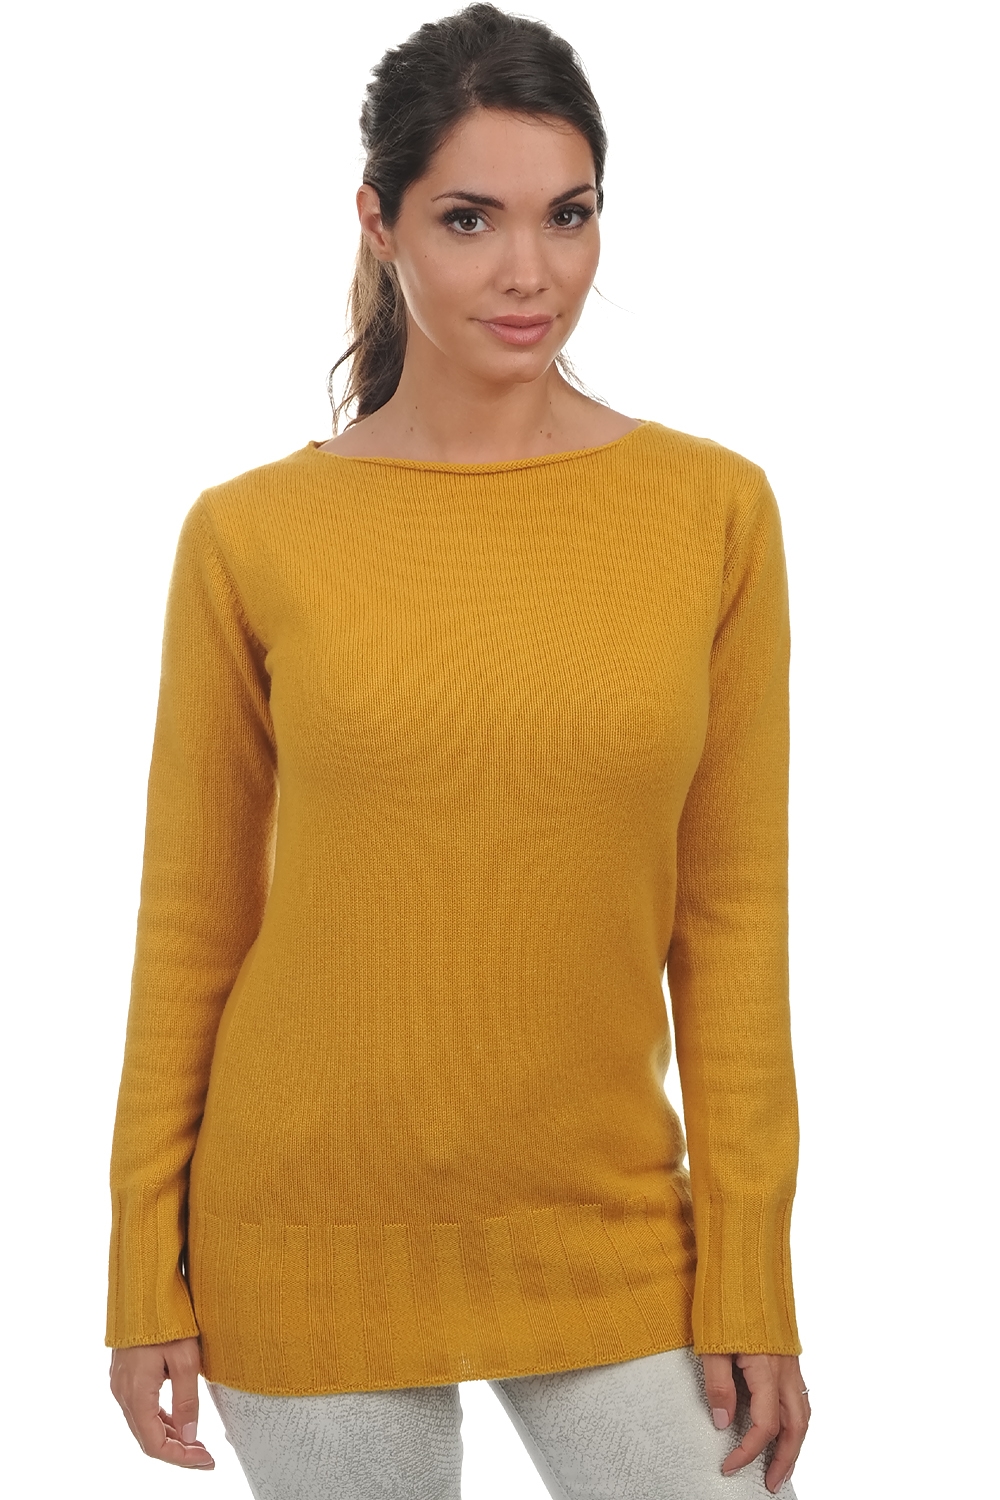 Cashmere ladies chunky sweater july mustard 4xl